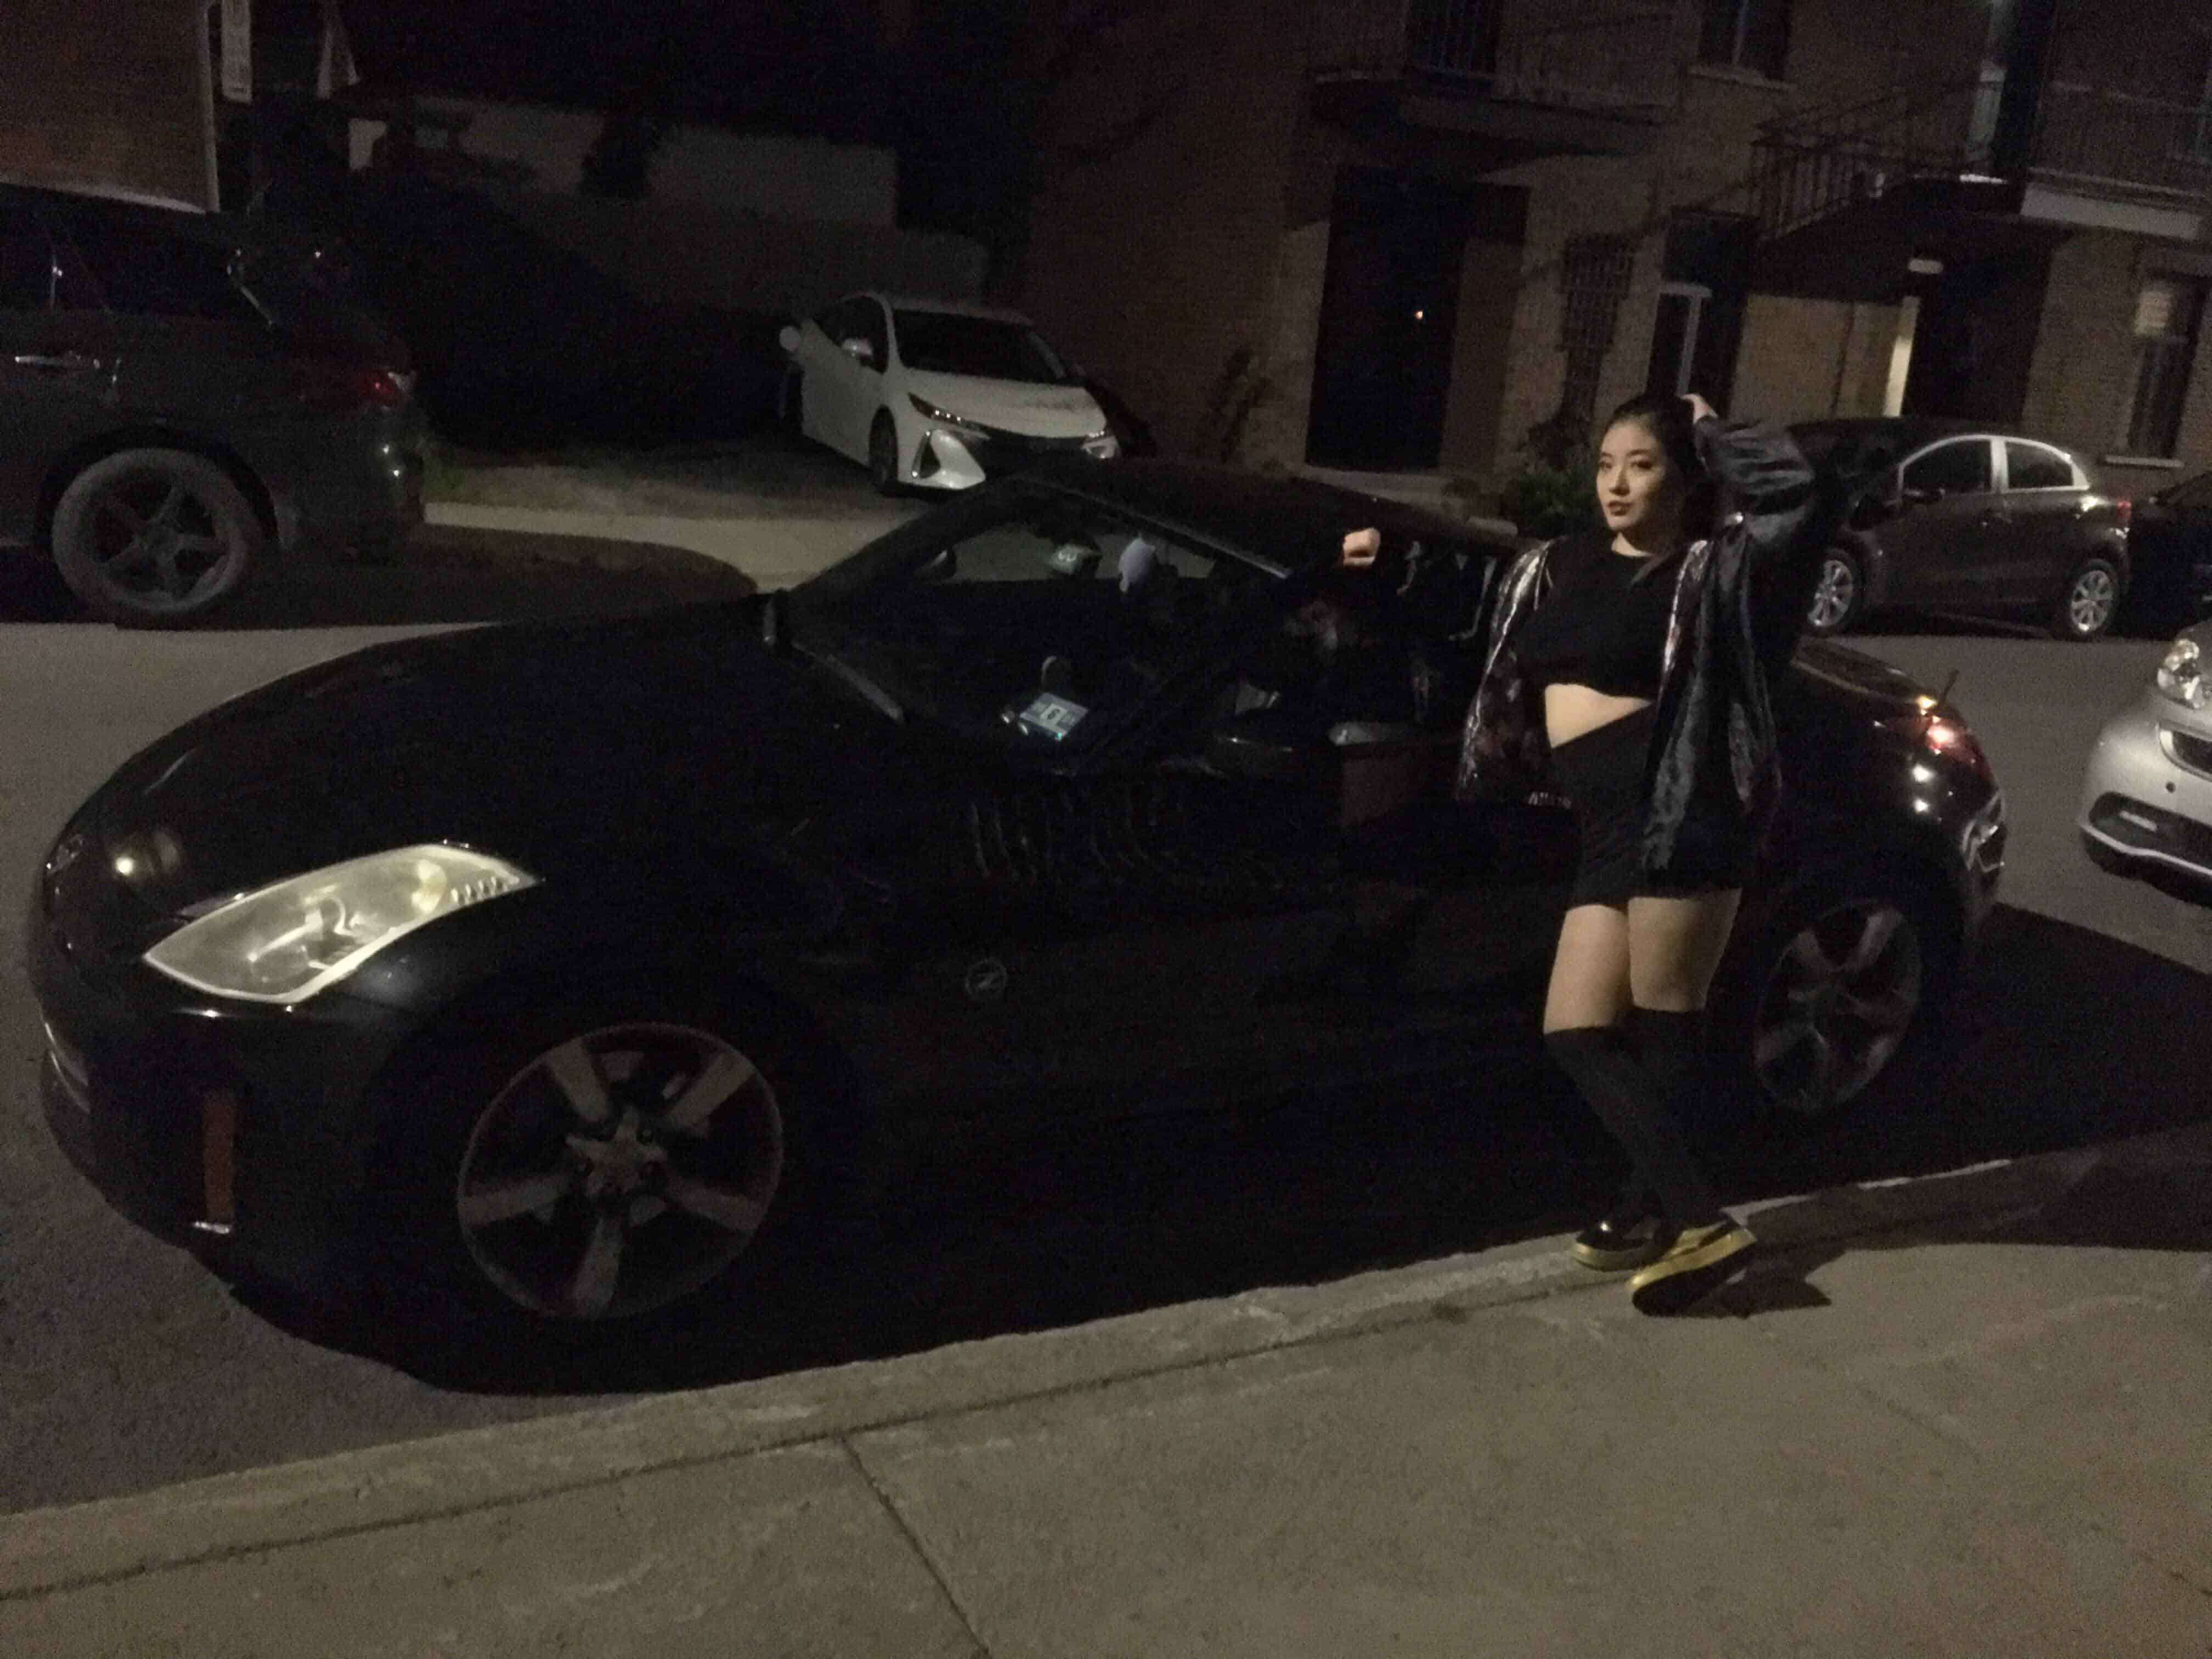 Picture of Zetsumi, a black 350z with a Leche